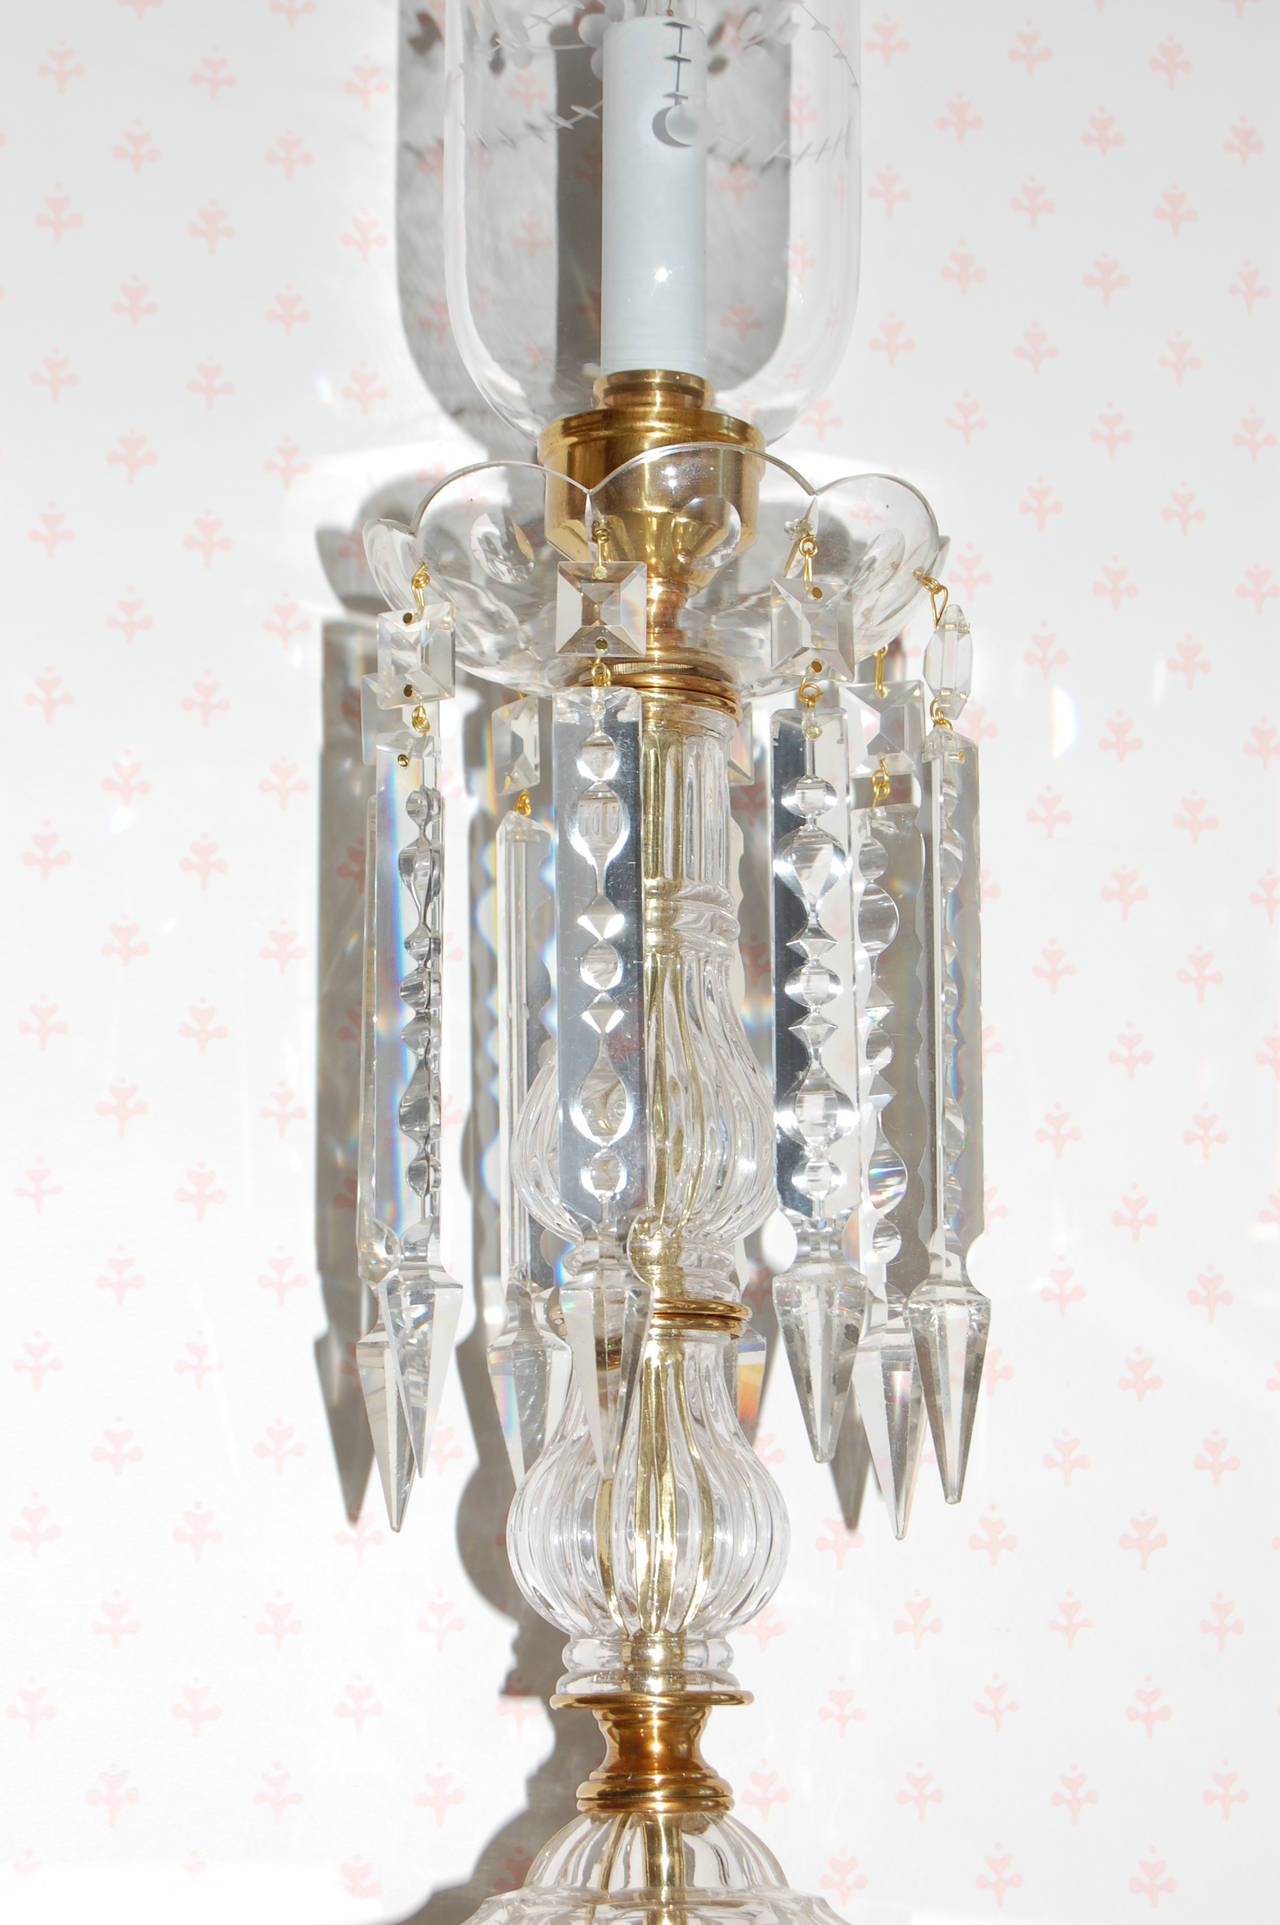 Pair of Crystal and Brass Candle Stick Lamps with Crystal 